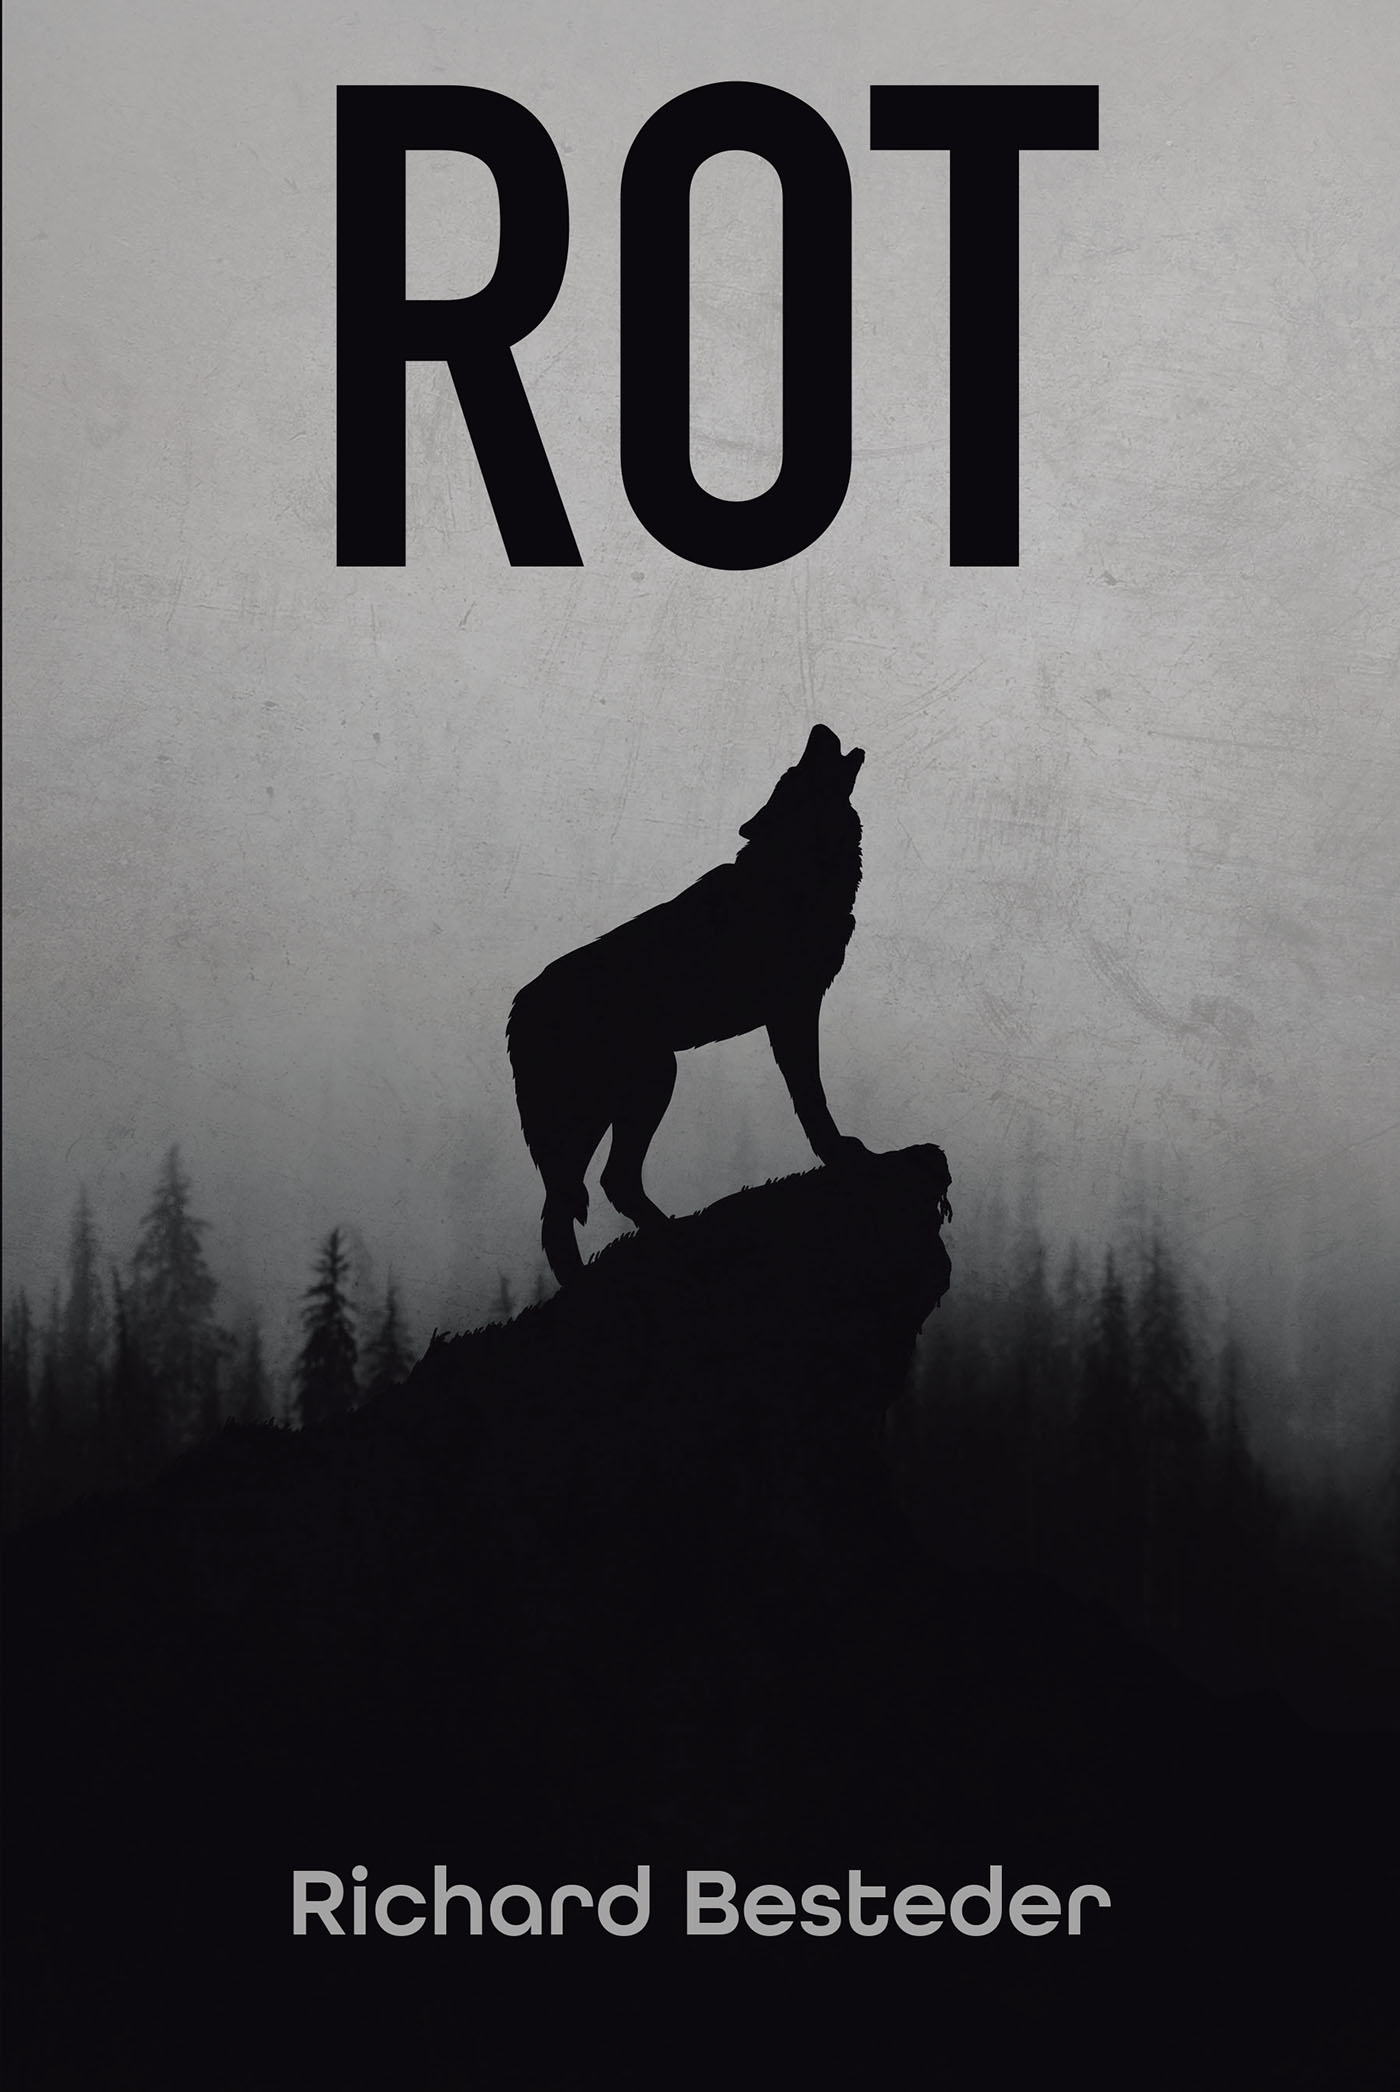 Richard Besteder’s Newly Released "Rot" Brings the Tragic Life of Red Full Circle Within a Loving Son Bent on Revenge